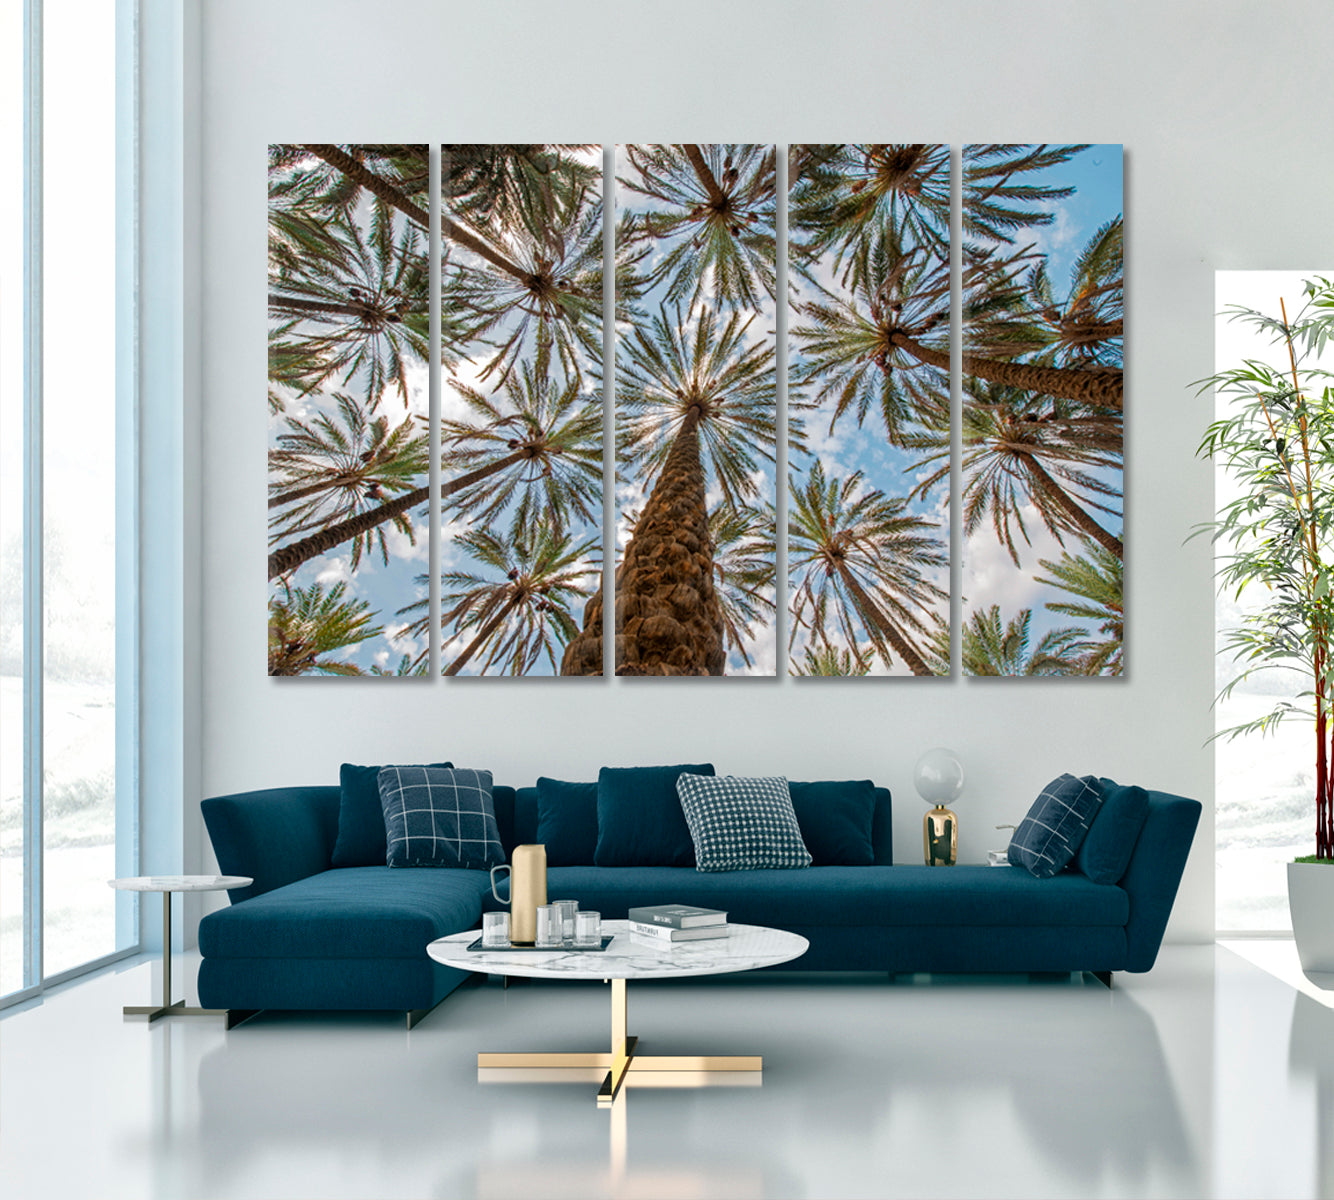 Sky & Tropical Exotic Palms Trees Panorama Tropical, Exotic Art Print Artesty 5 panels 36" x 24" 